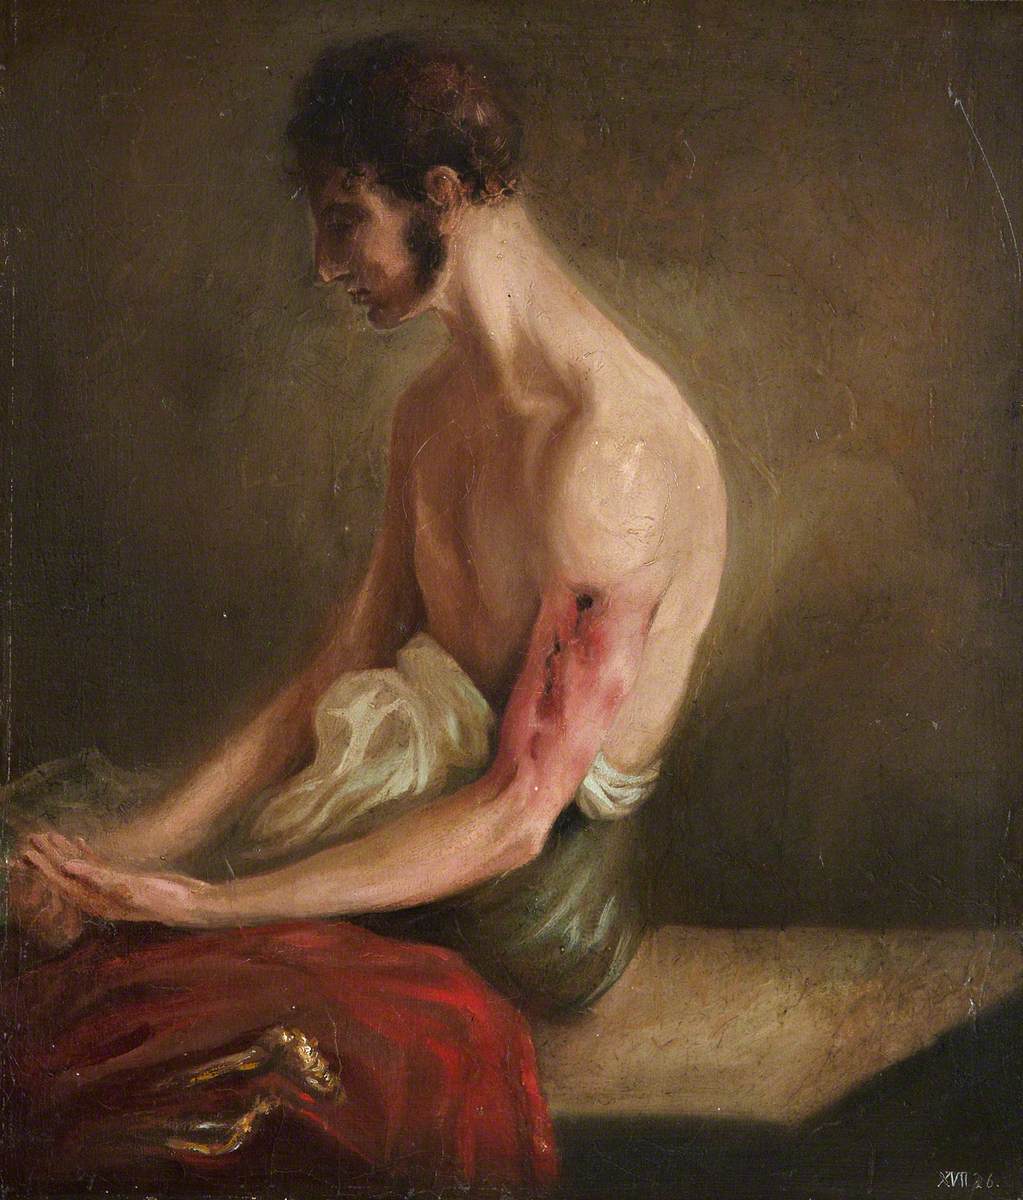 The Wounded following the Battle of Corunna: Gunshot Fracture of Shaft of Humerus